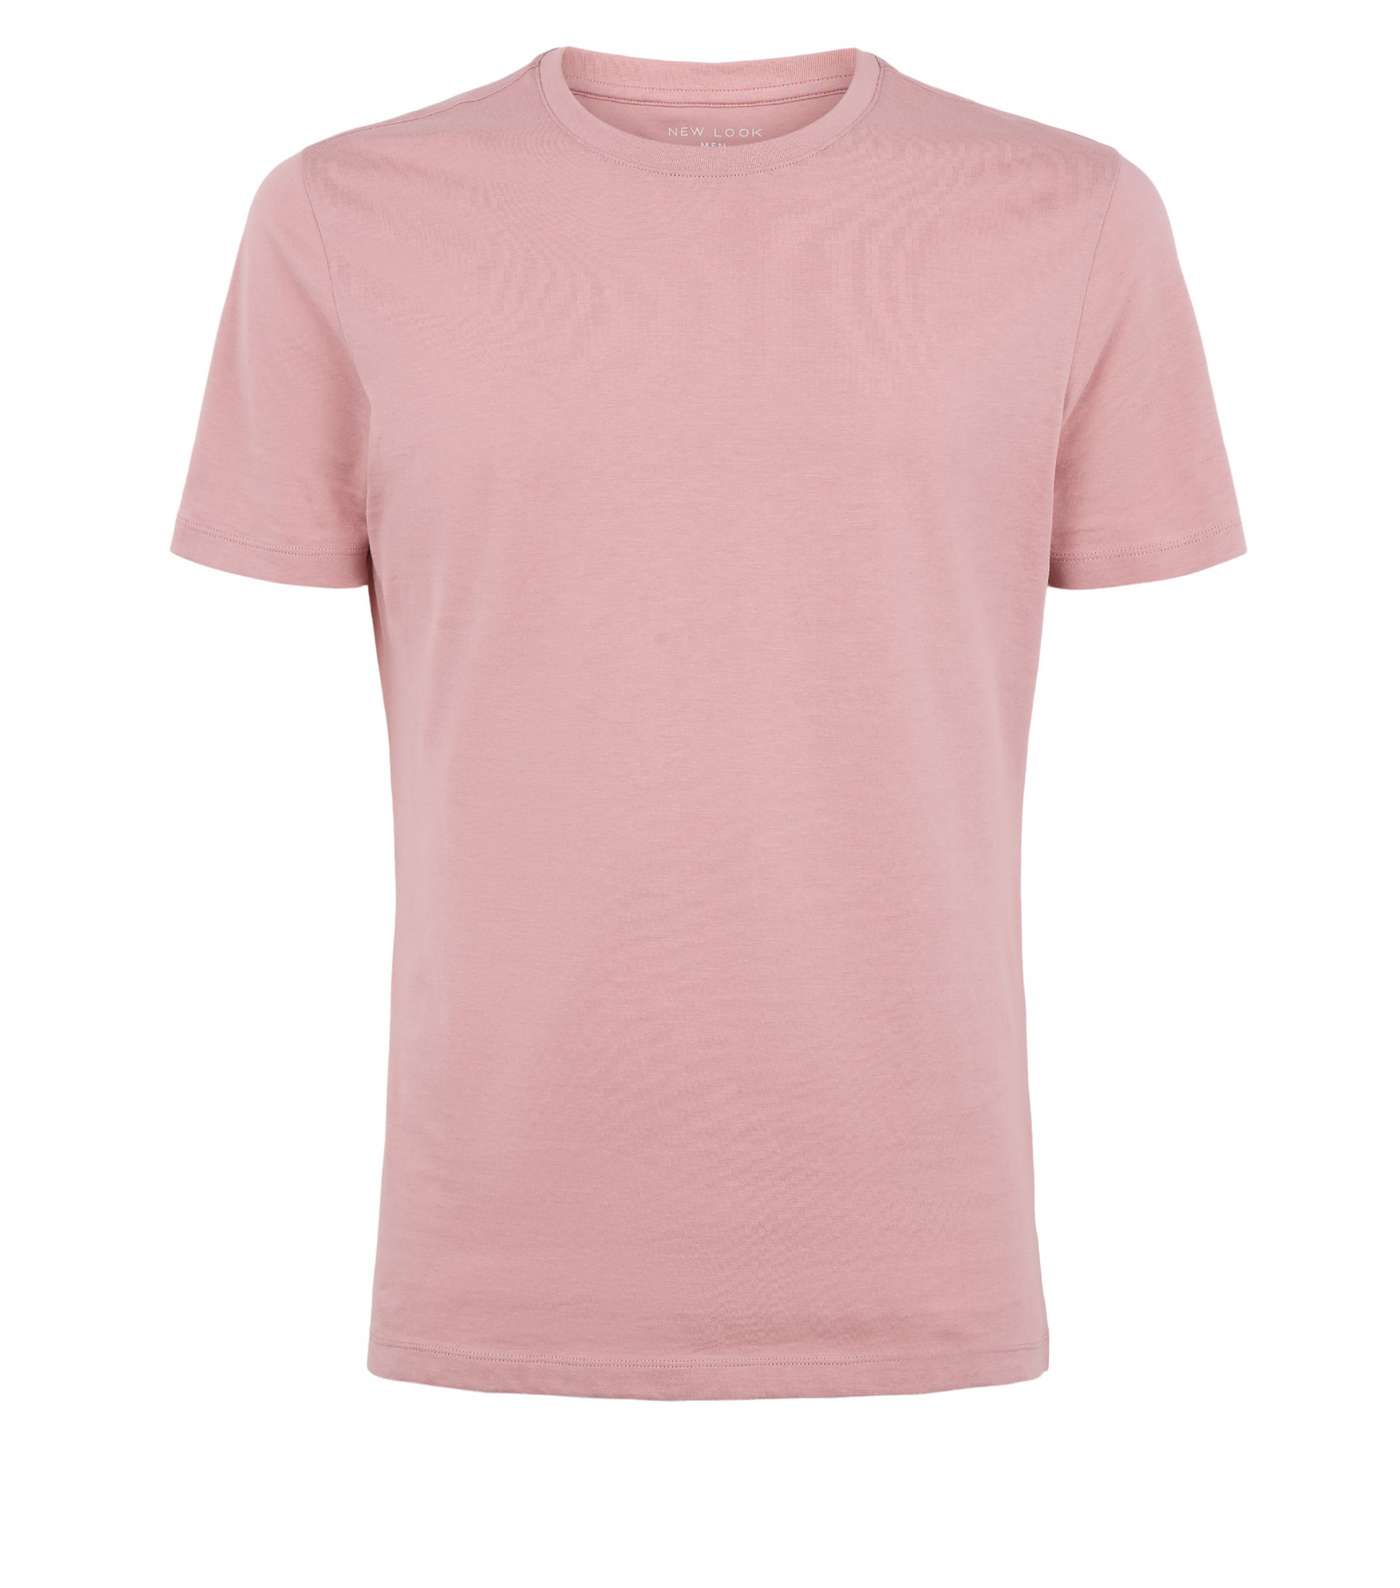 Mid Pink Muscle Fit Cotton T-Shirt Image 4